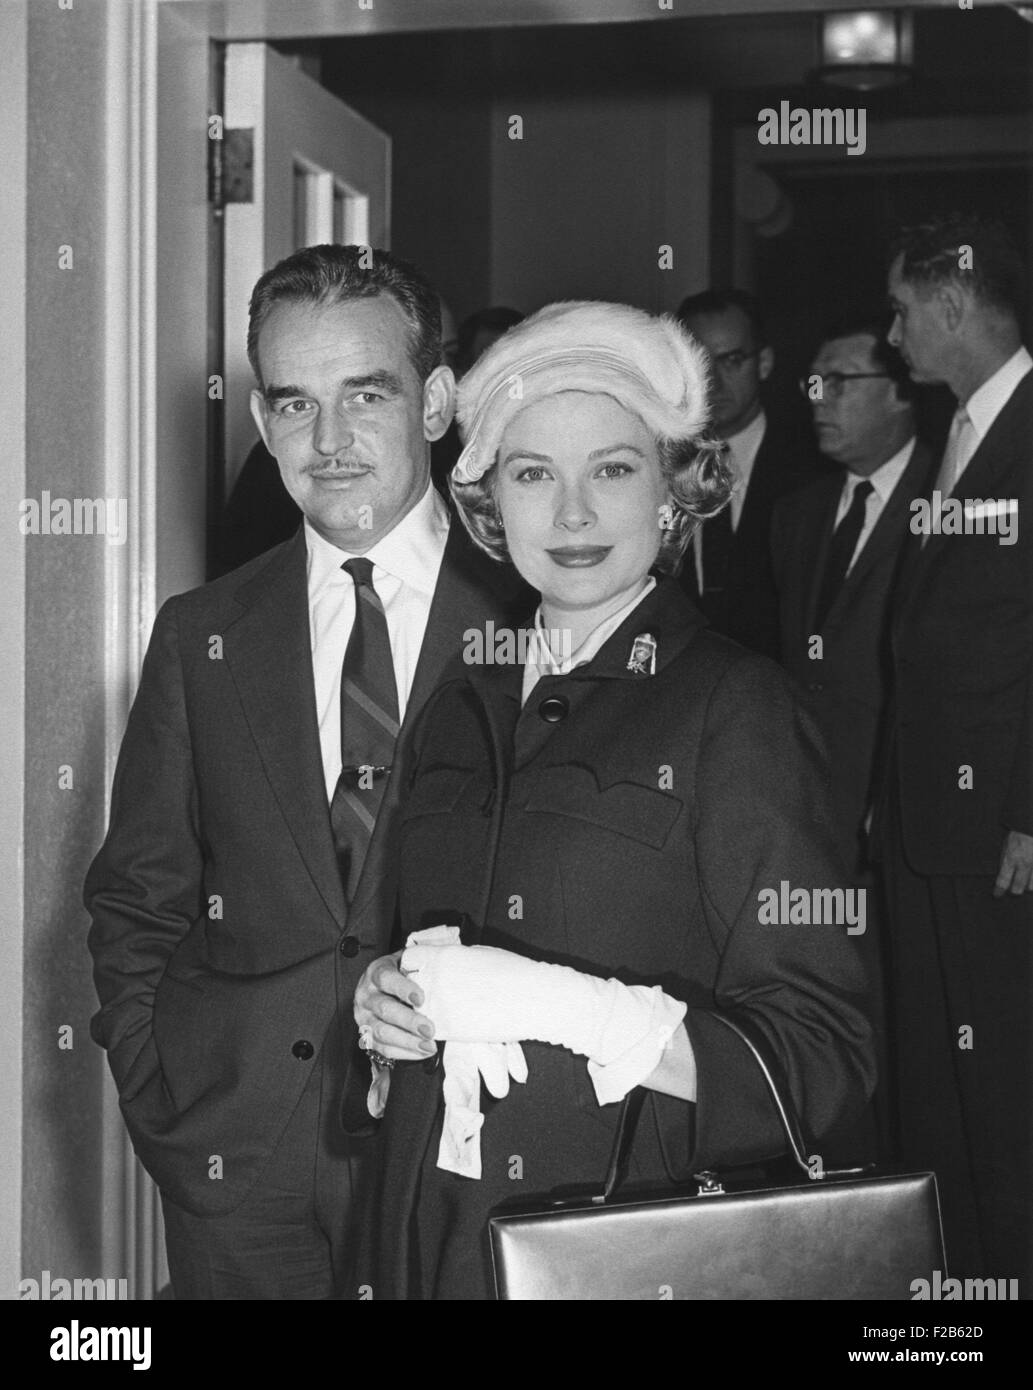 Prince Rainer and Princess Grace at the White House during their visit to President Eisenhower. Oct. 11, 1956. - (BSLOC 2014 16 165) Stock Photo